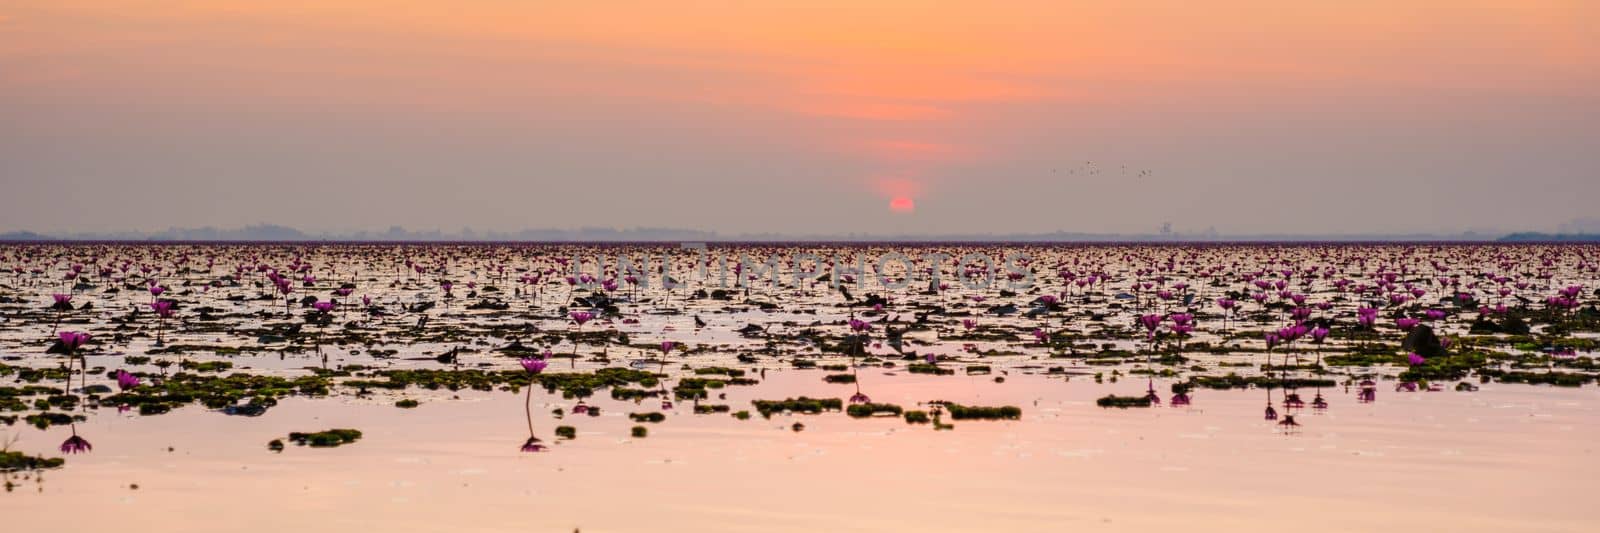 Red Lotus Sea Kumphawapi is full of pink flowers in Udon Thani in northern Thailand. Flora of Southeast Asia.